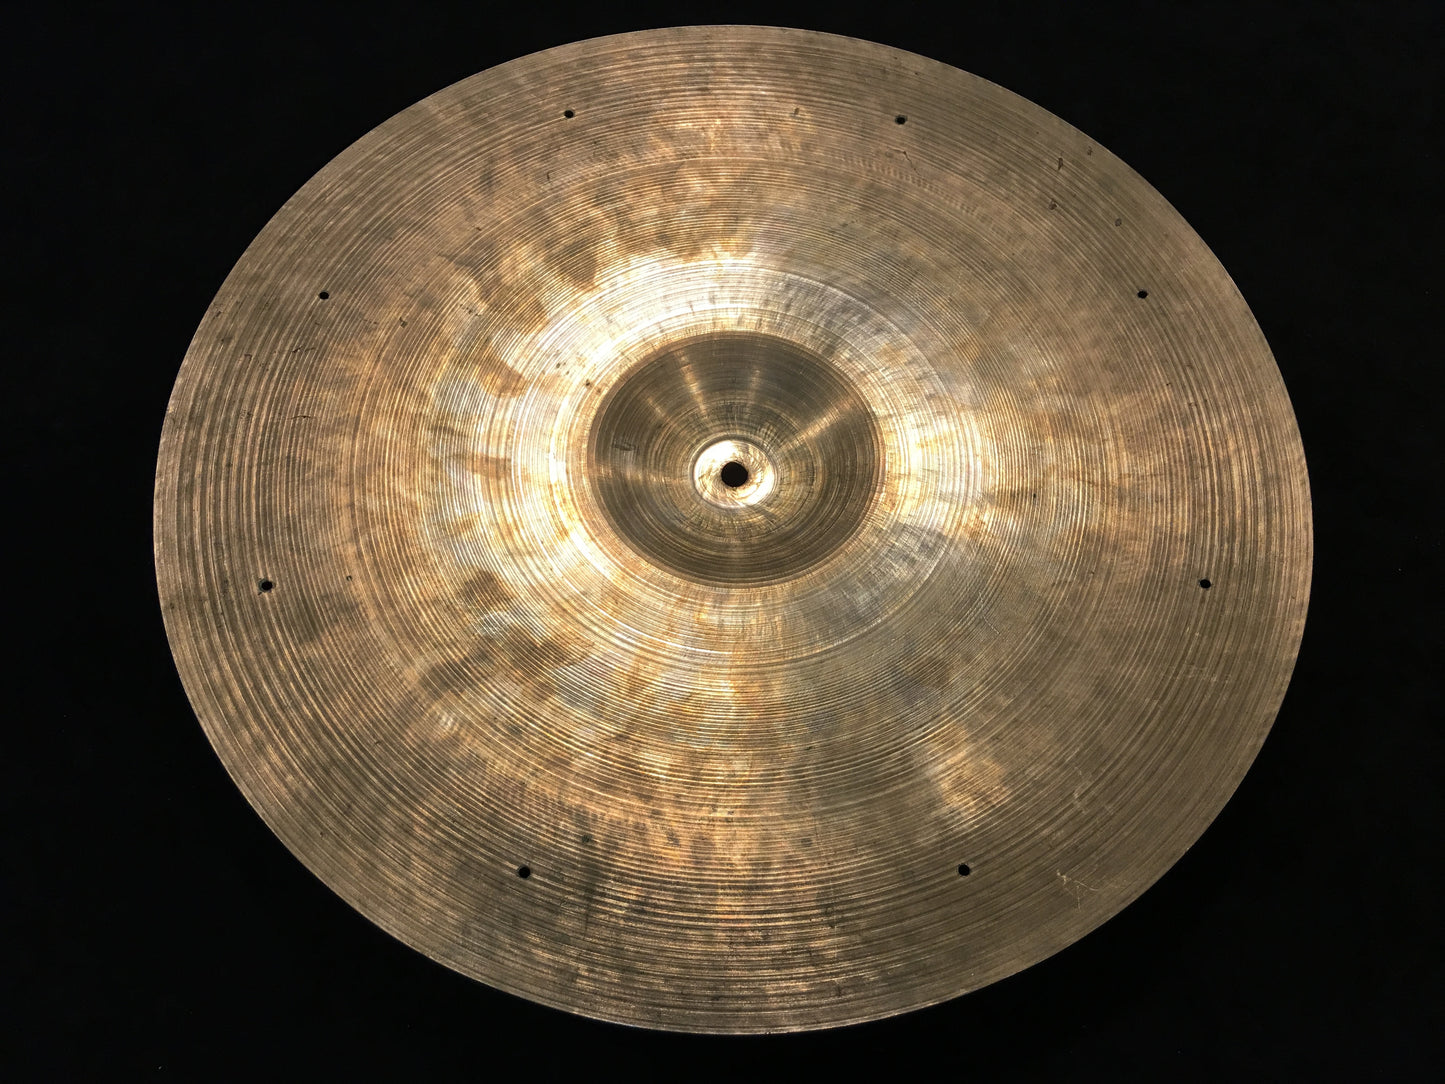 19" Zildjian A 1950's Block Stamp Hammered Crash / Ride Sizzle Cymbal 1836g #524